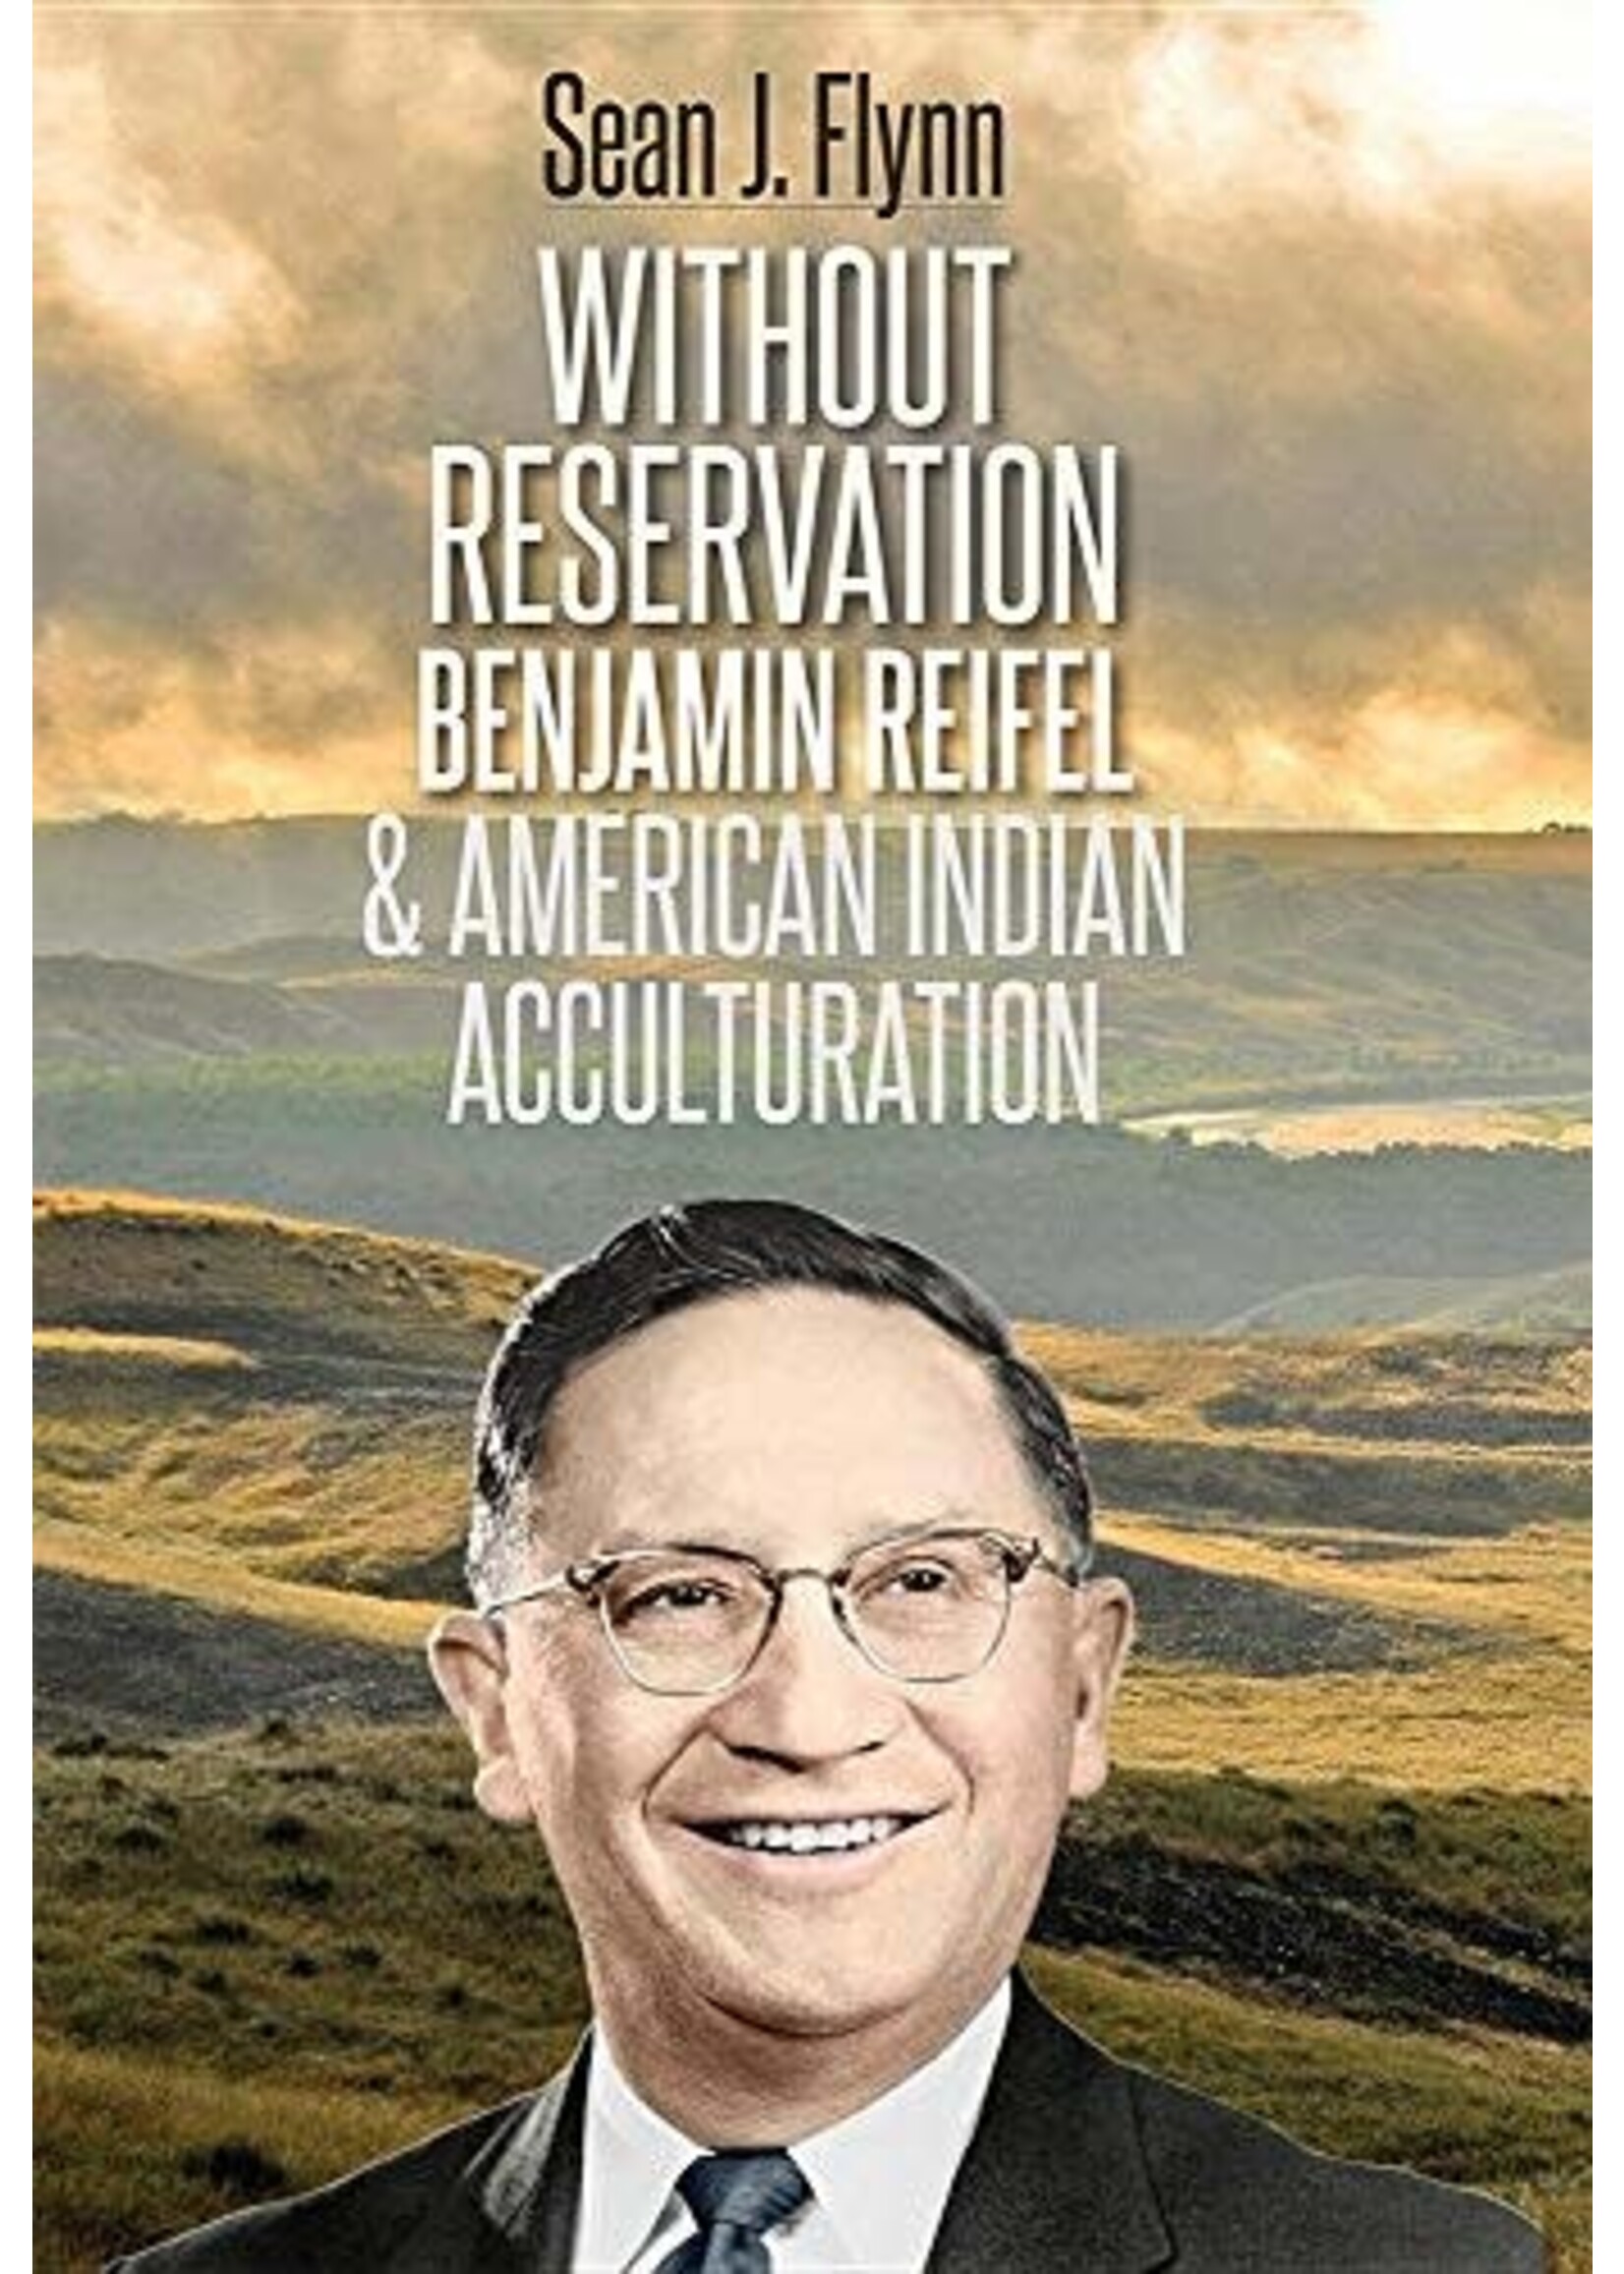 Without Reservation: Benjamin Reifel and American Indian Acculturation